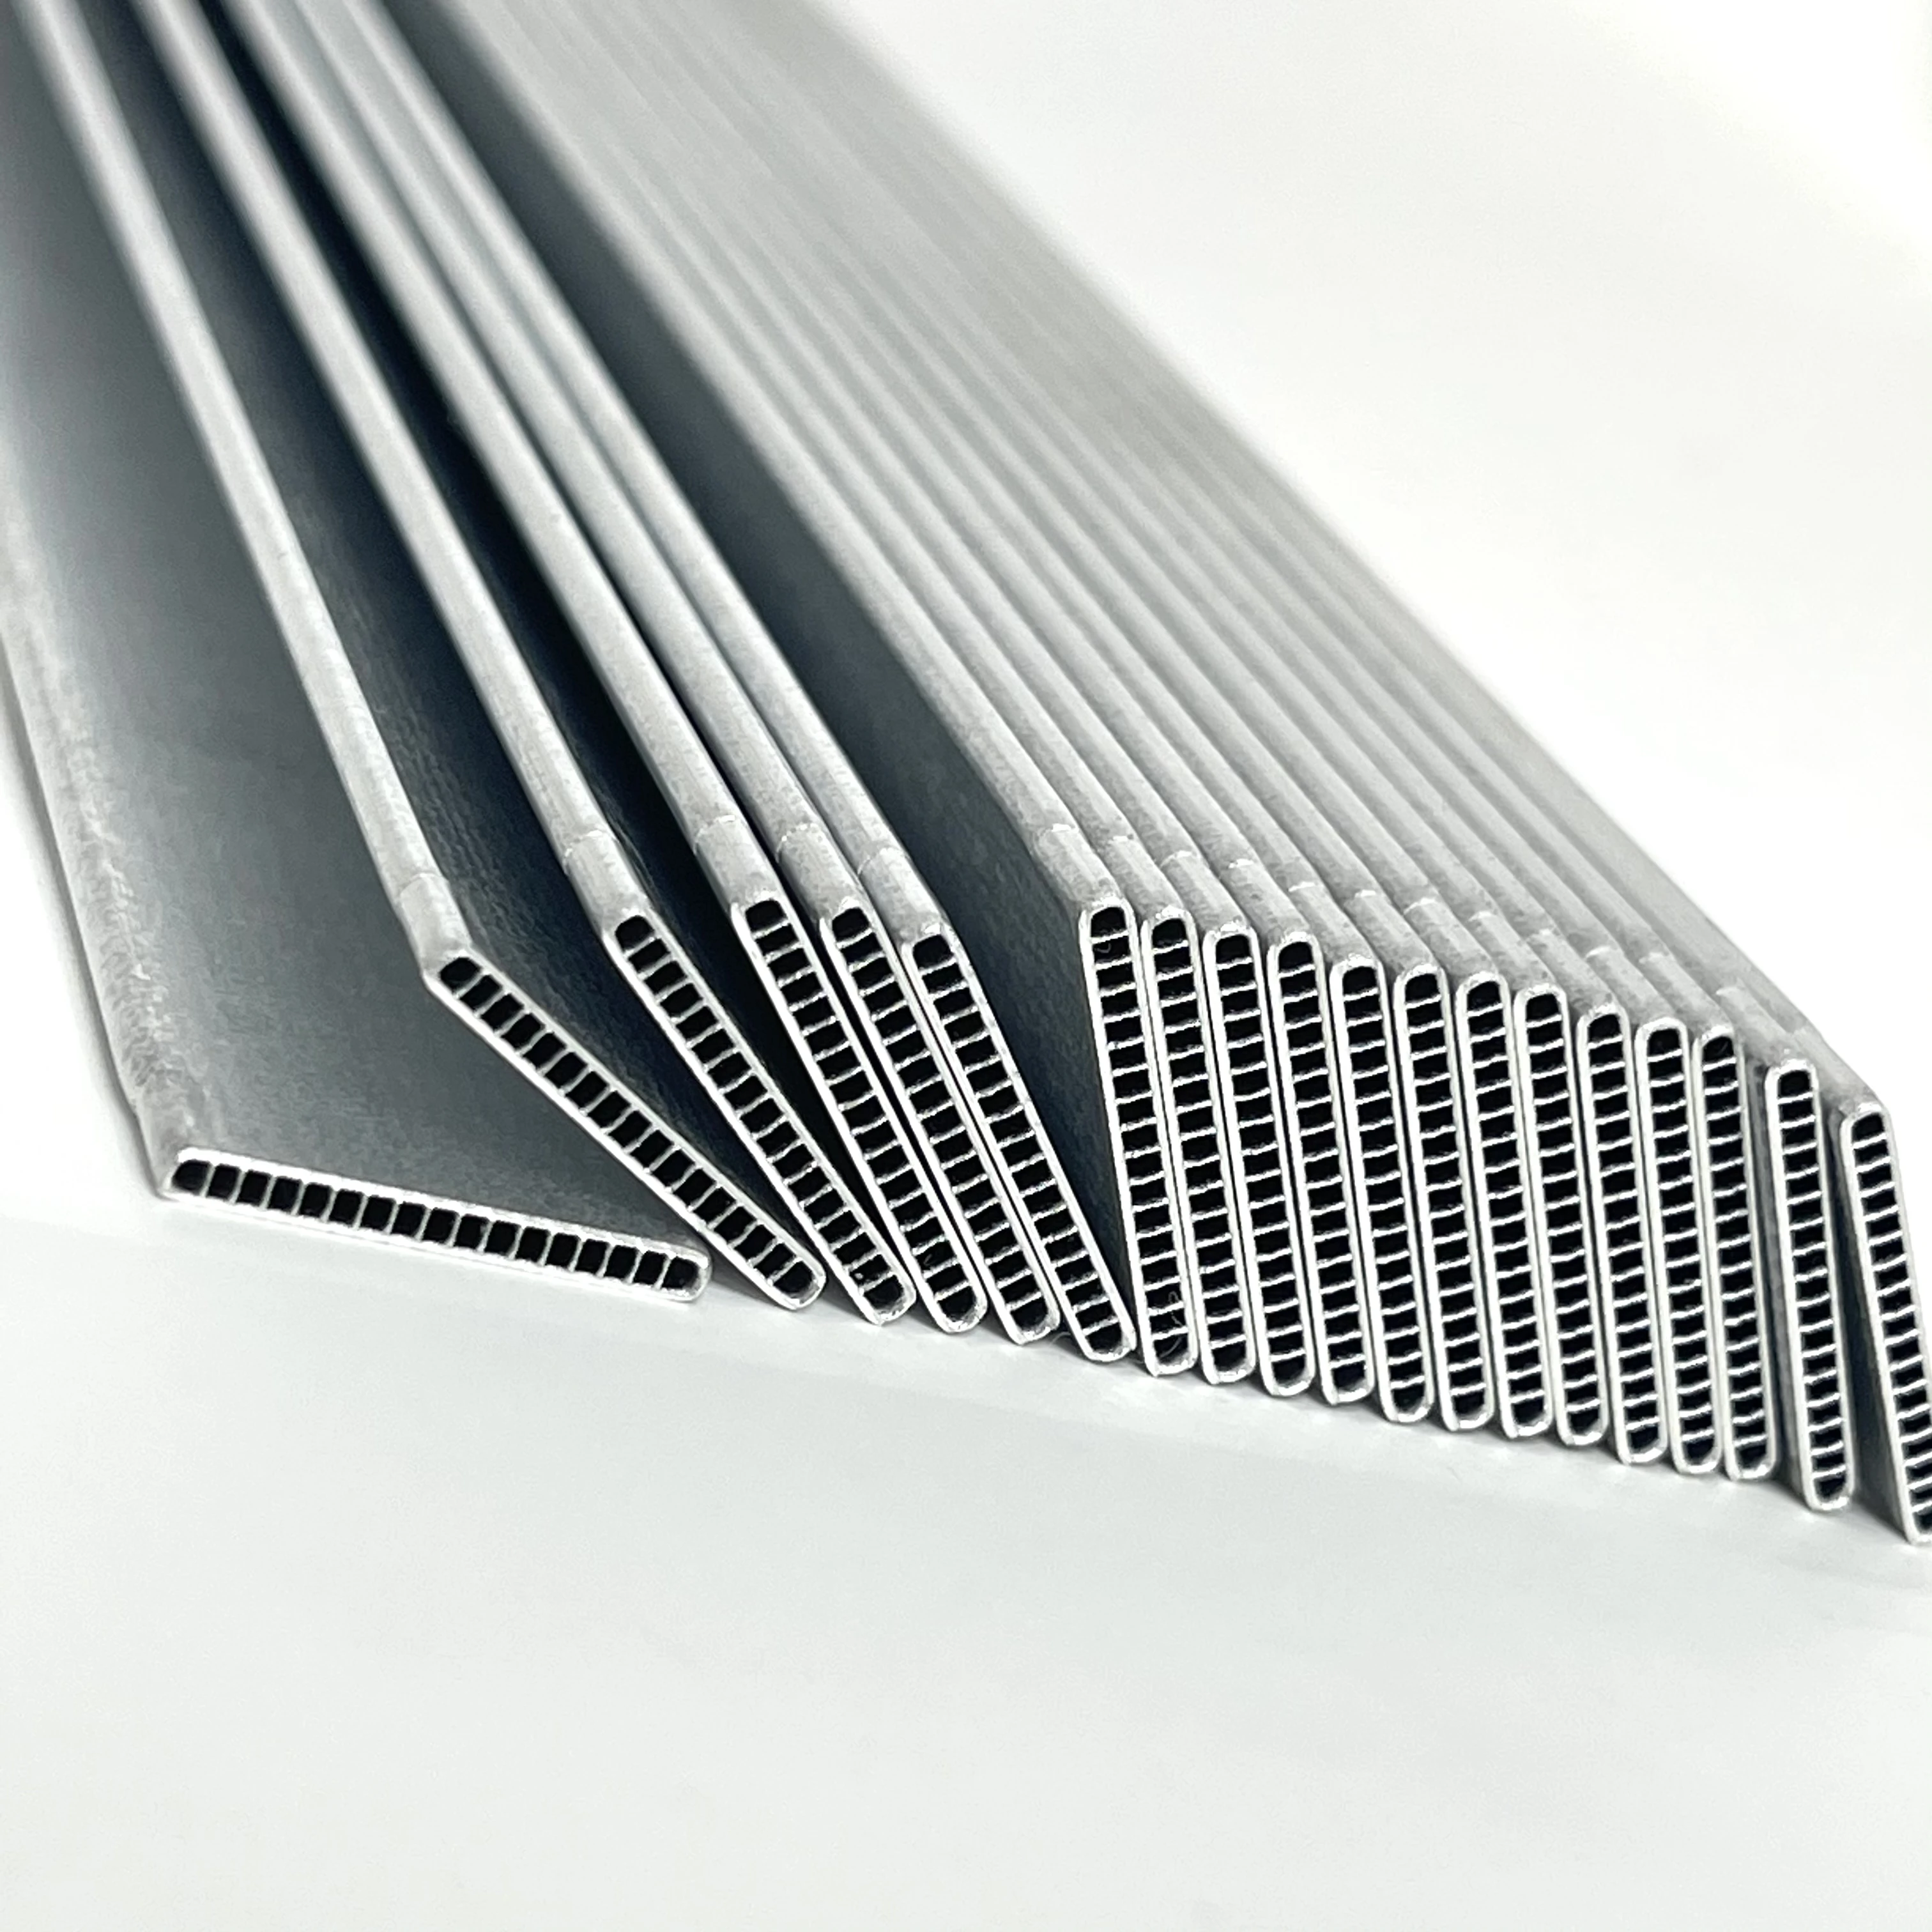 Aluminum Extruded Microchannel Flat Tubes for Aluminum Heat Exchangers